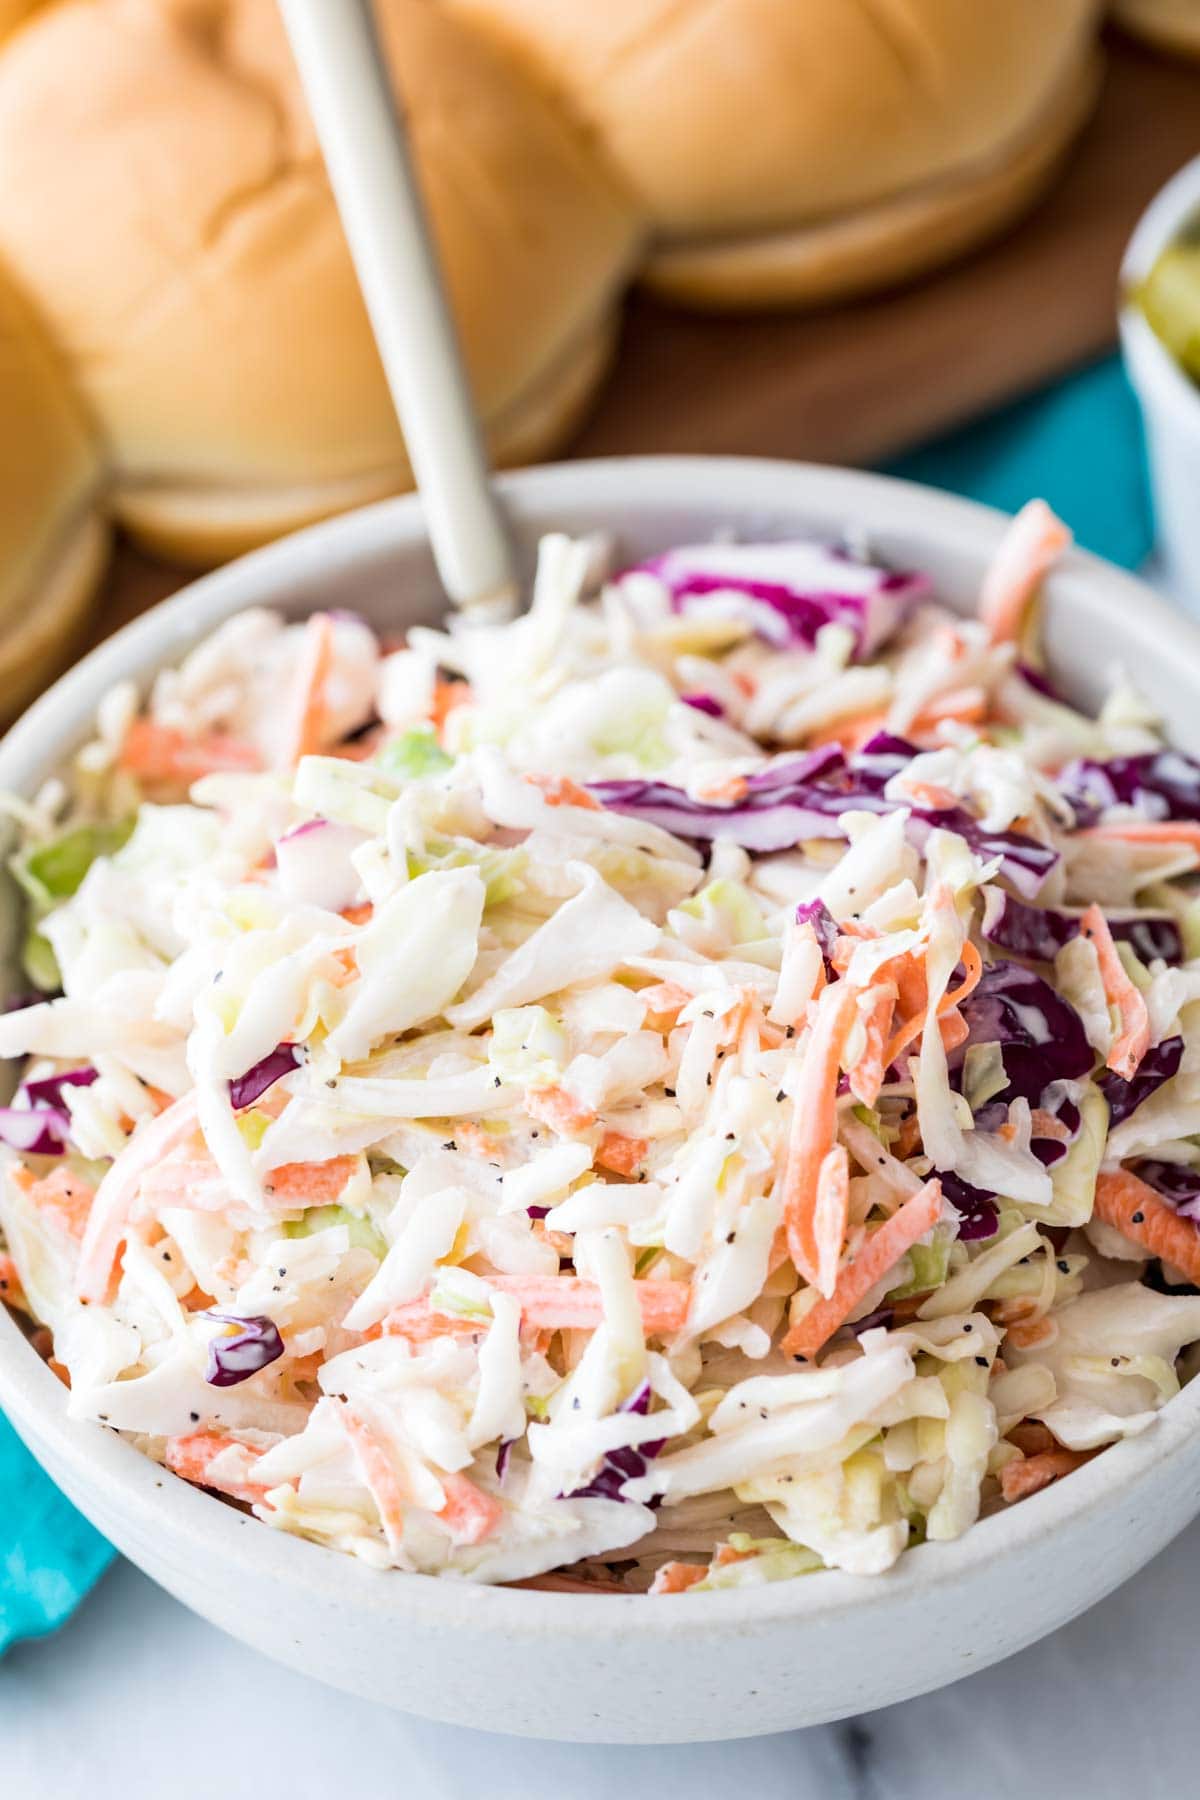 white bowl full of shredded cabbage and carrots coated in a creamy dressing